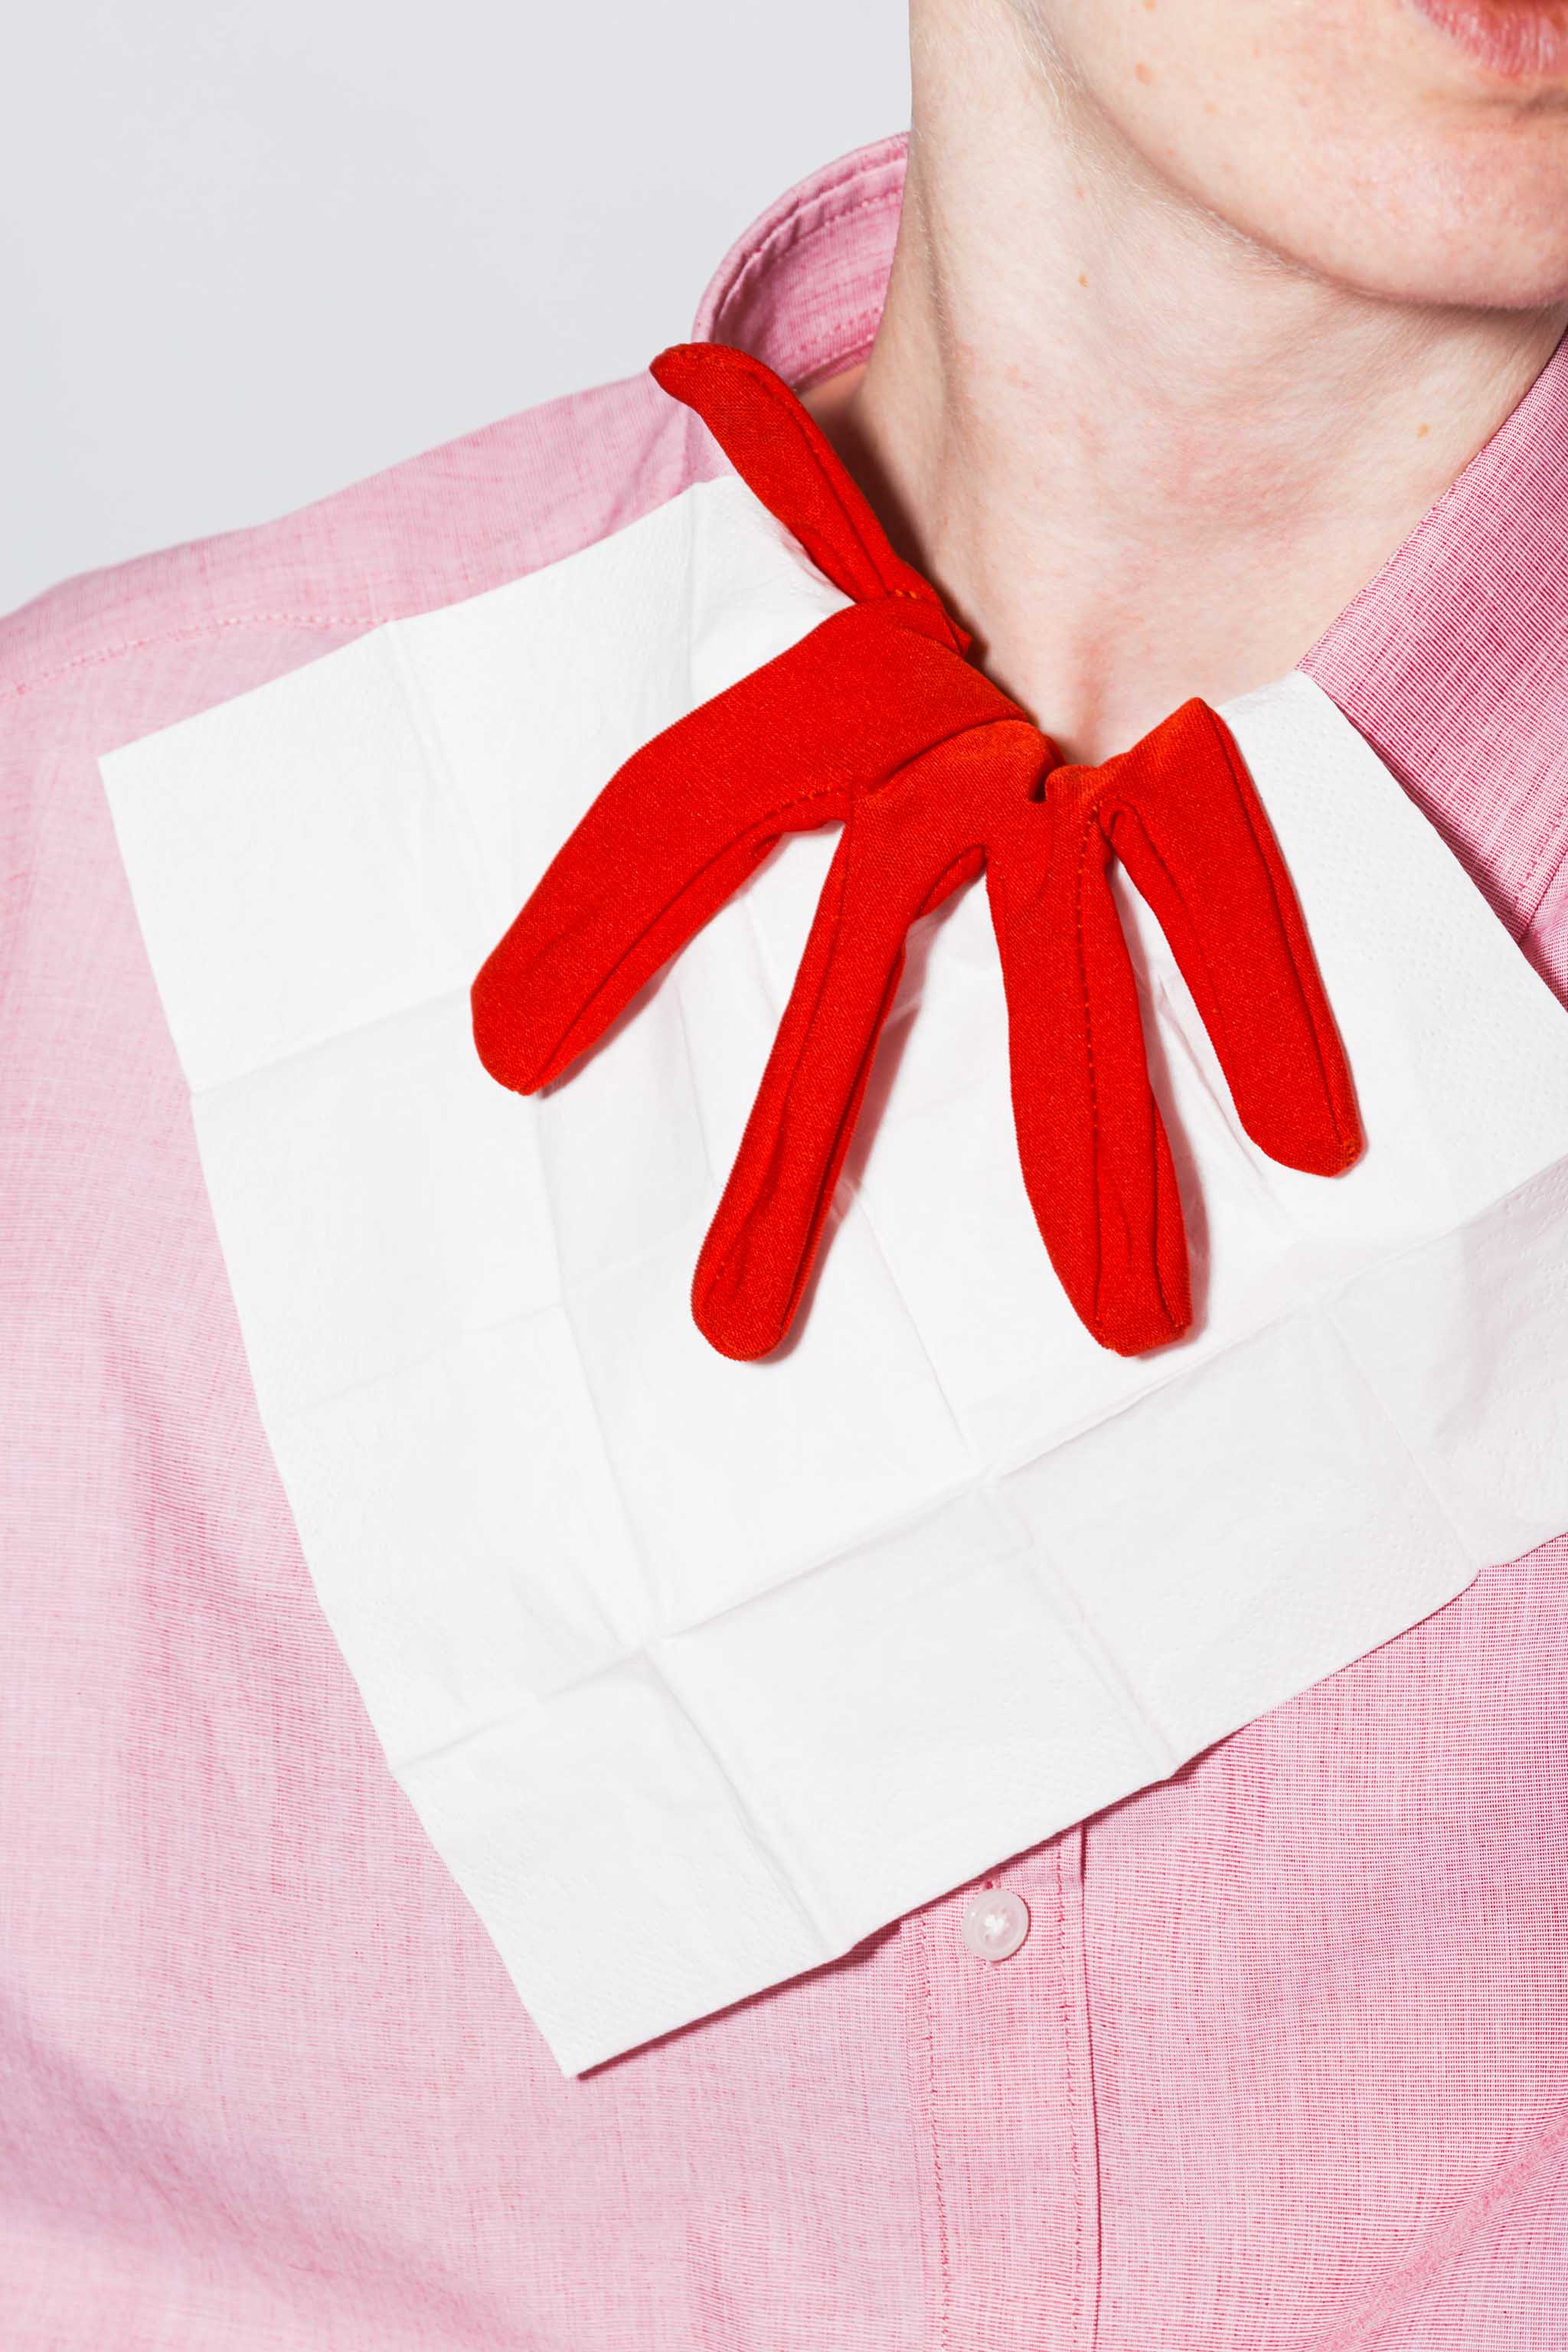 Close-up photo of a person in a pink dress shirt on top of which a white napkin print mockup with black lettering and a red glove are tucked, empty mockup.